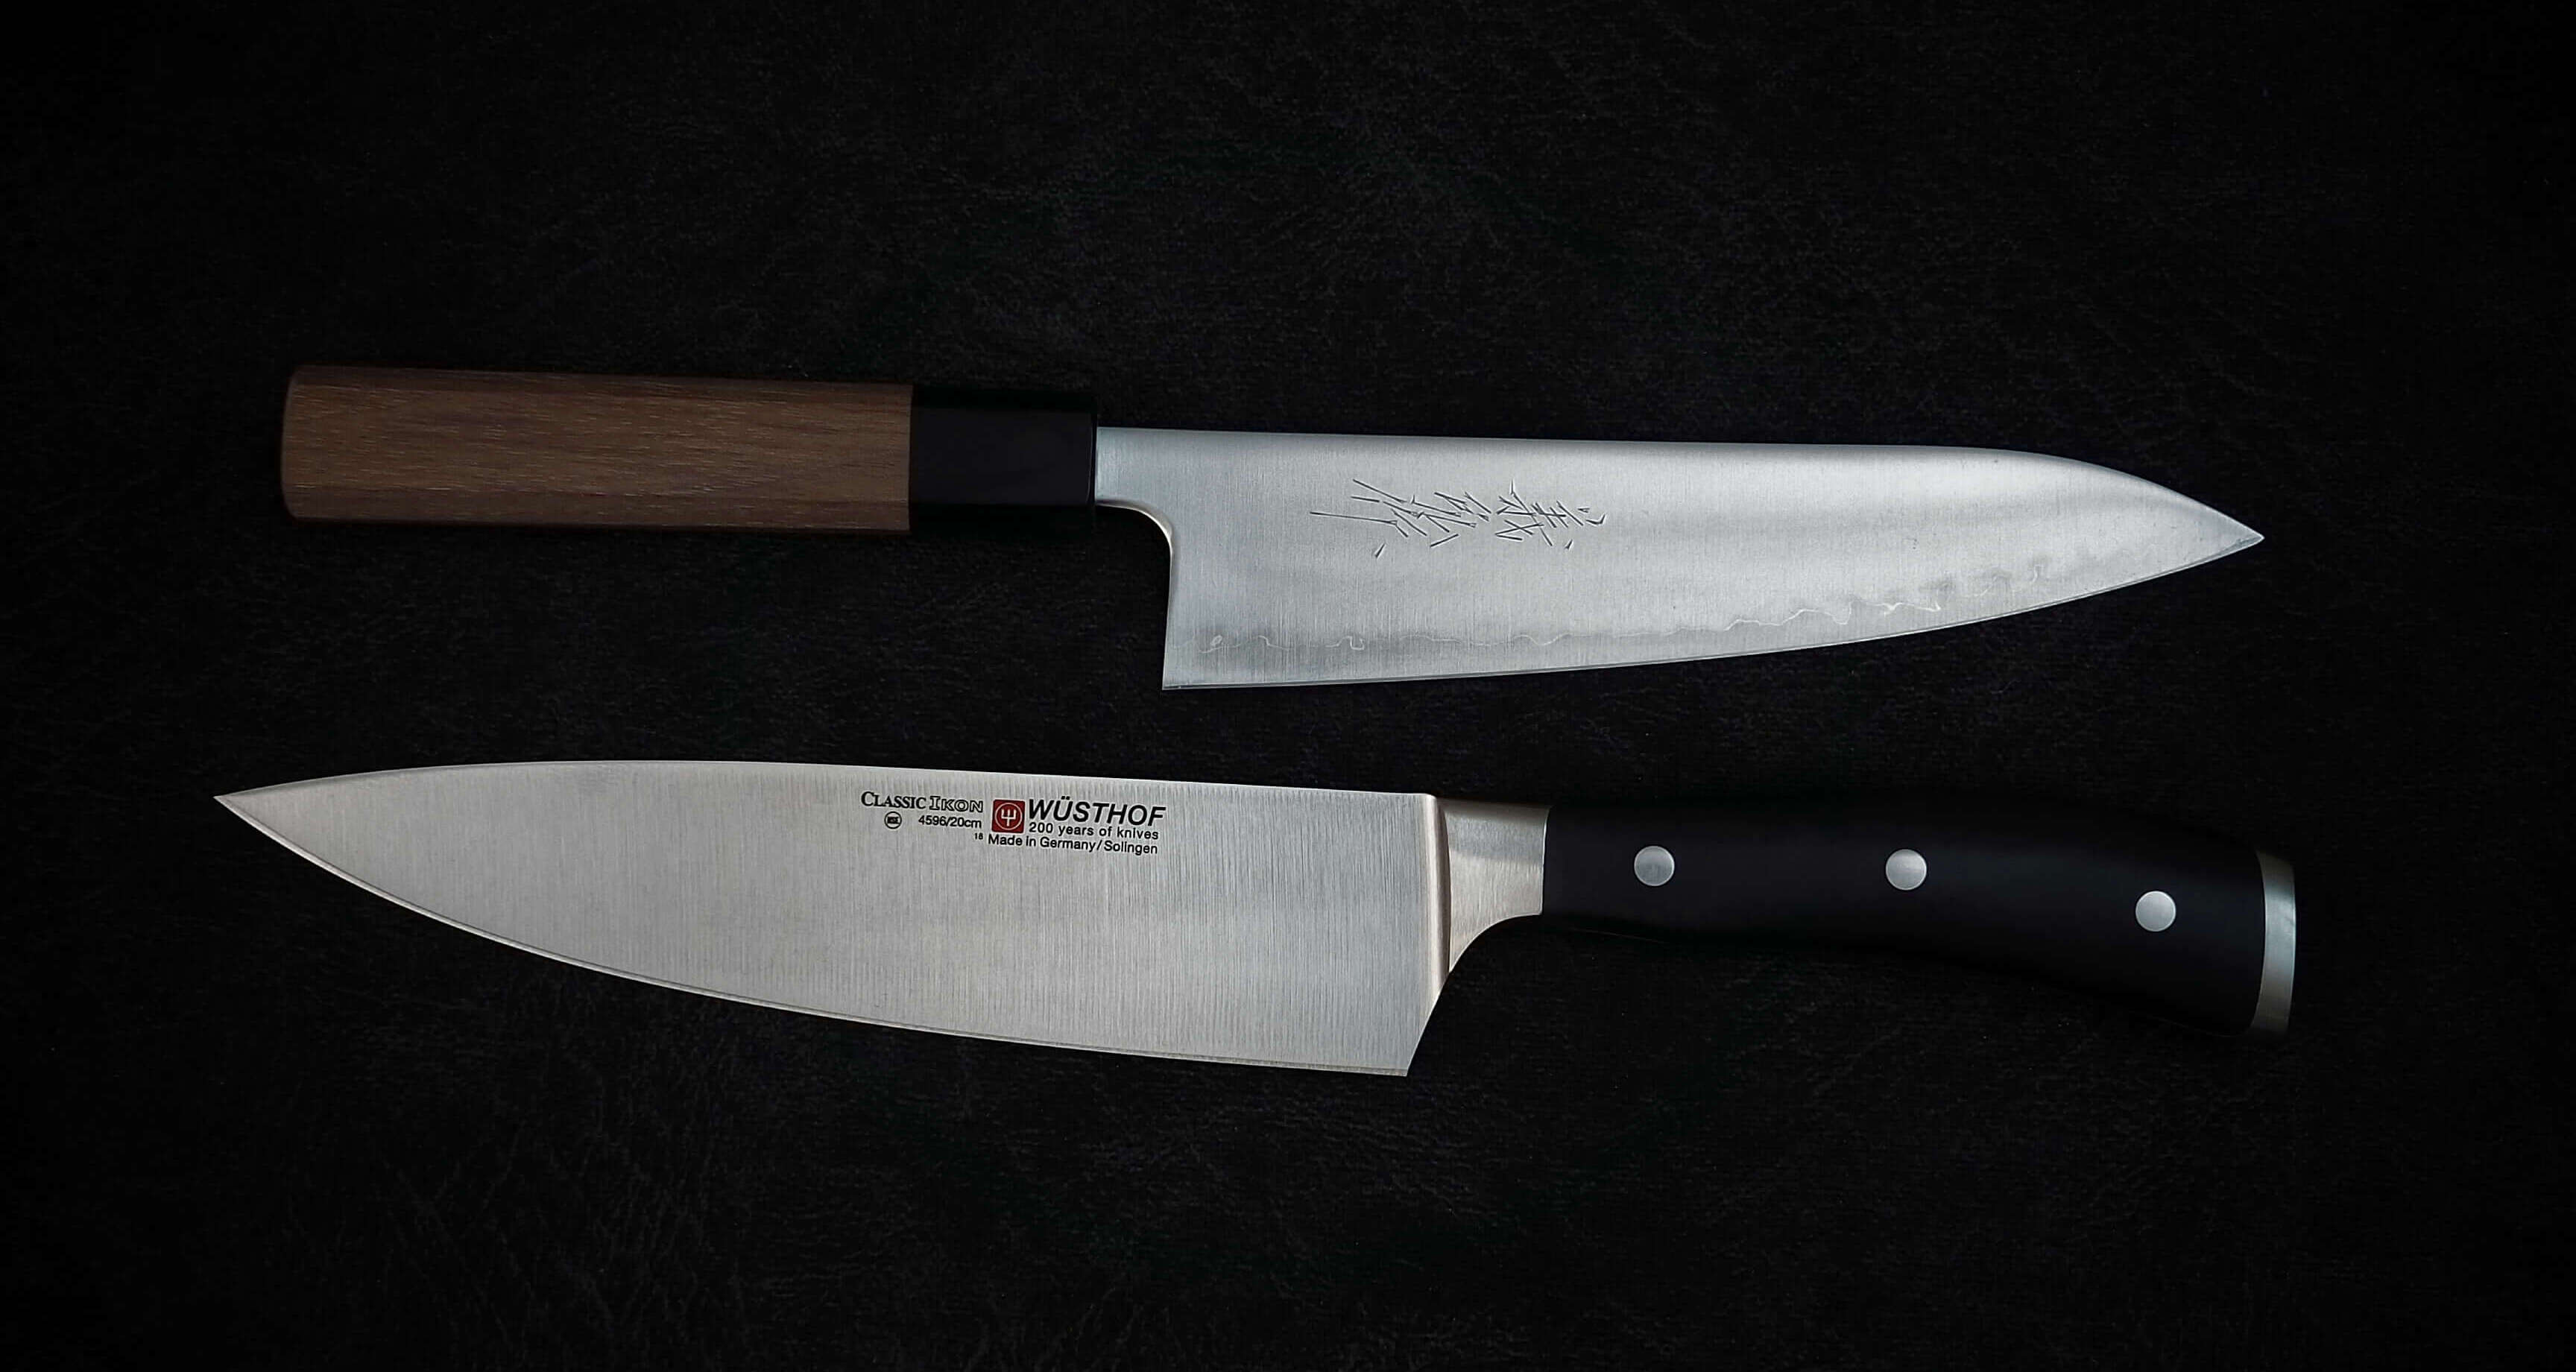 Cool Knives for Sale  Find Cool Knives That Aren't Mass Produced